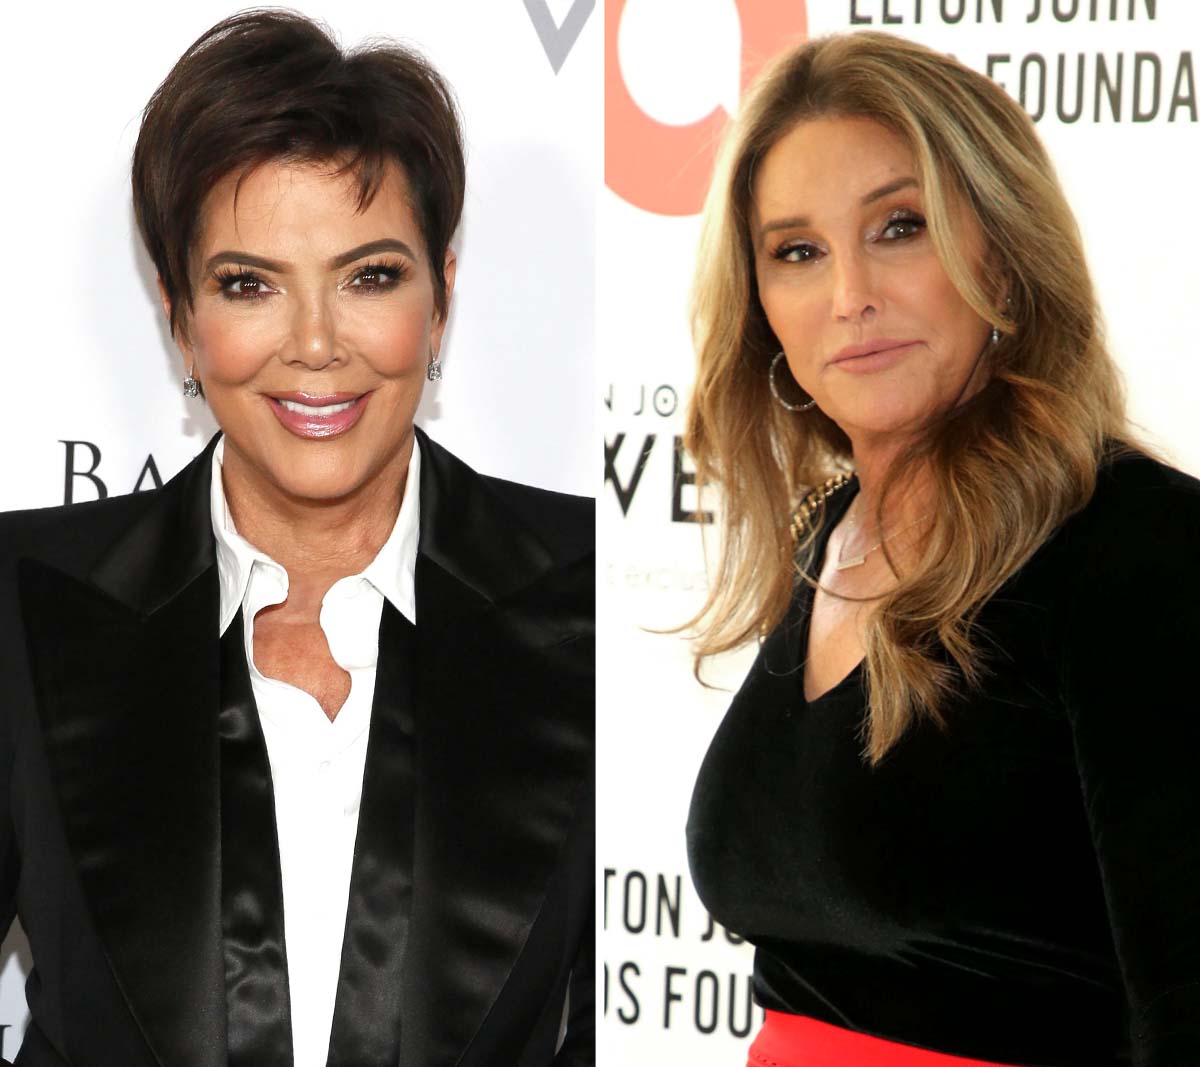 Kris Jenner Found Out About Caitlyn's Transition Through 'KUWTK' Execs